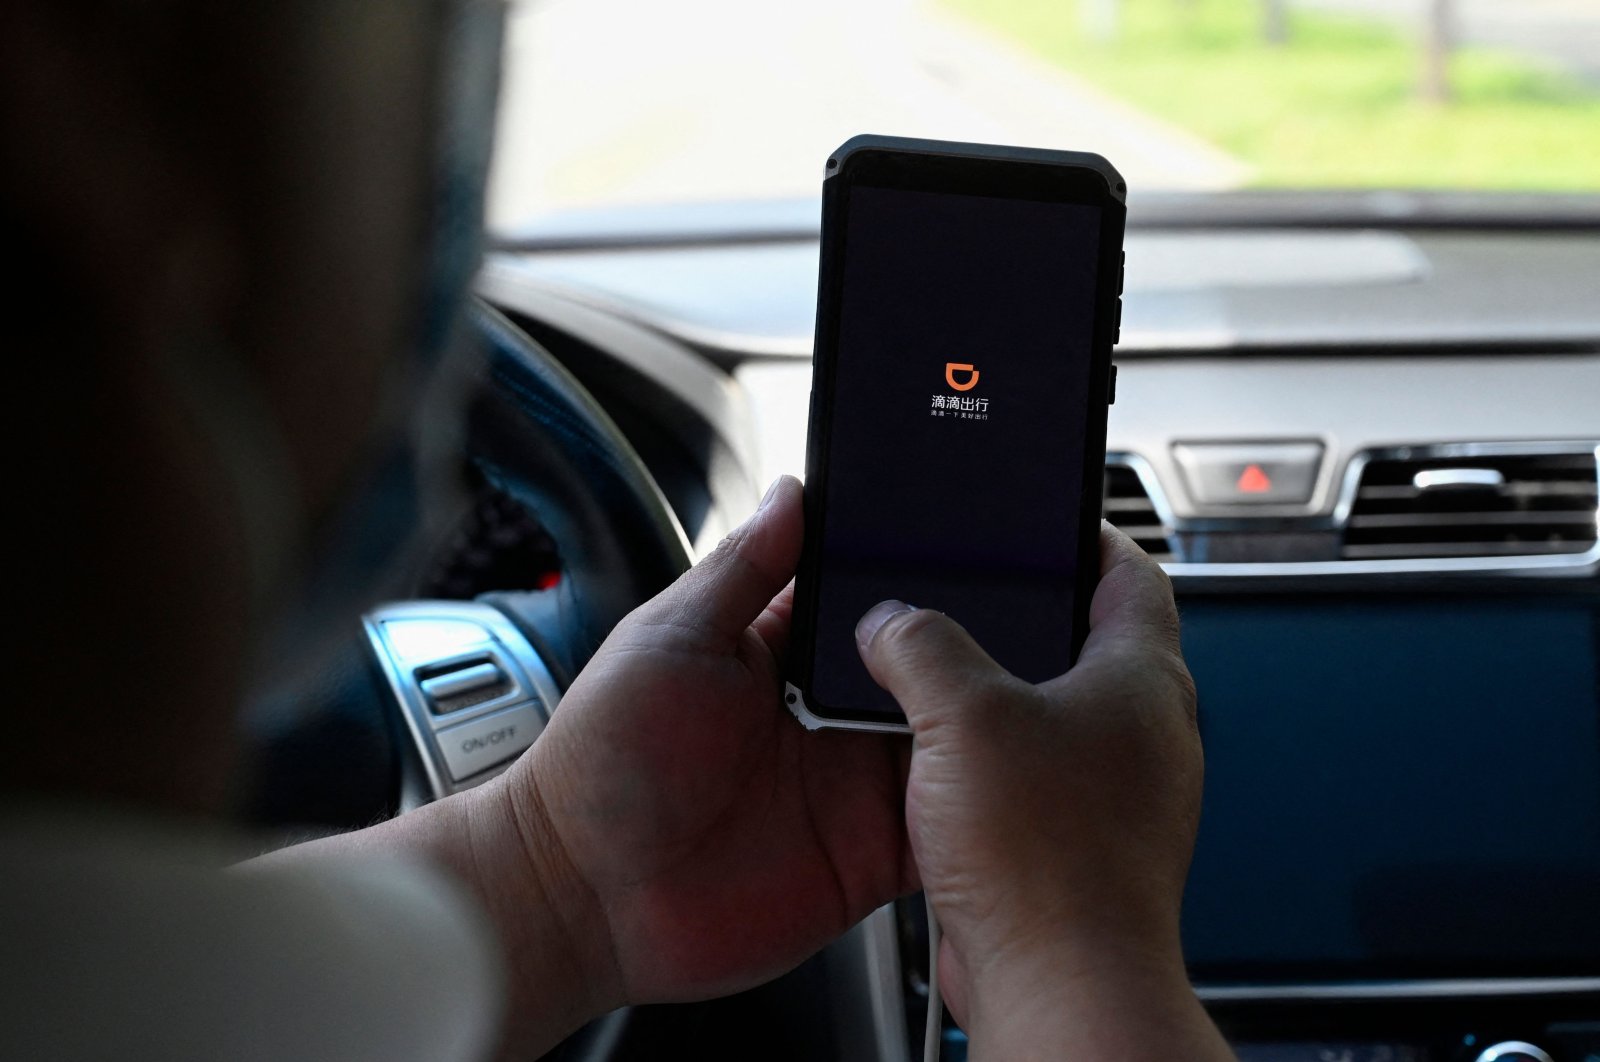 A driver opens the Didi Chuxing ride-hailing app on his smartphone in Beijing, China, July 2, 2021. (AFP Photo)